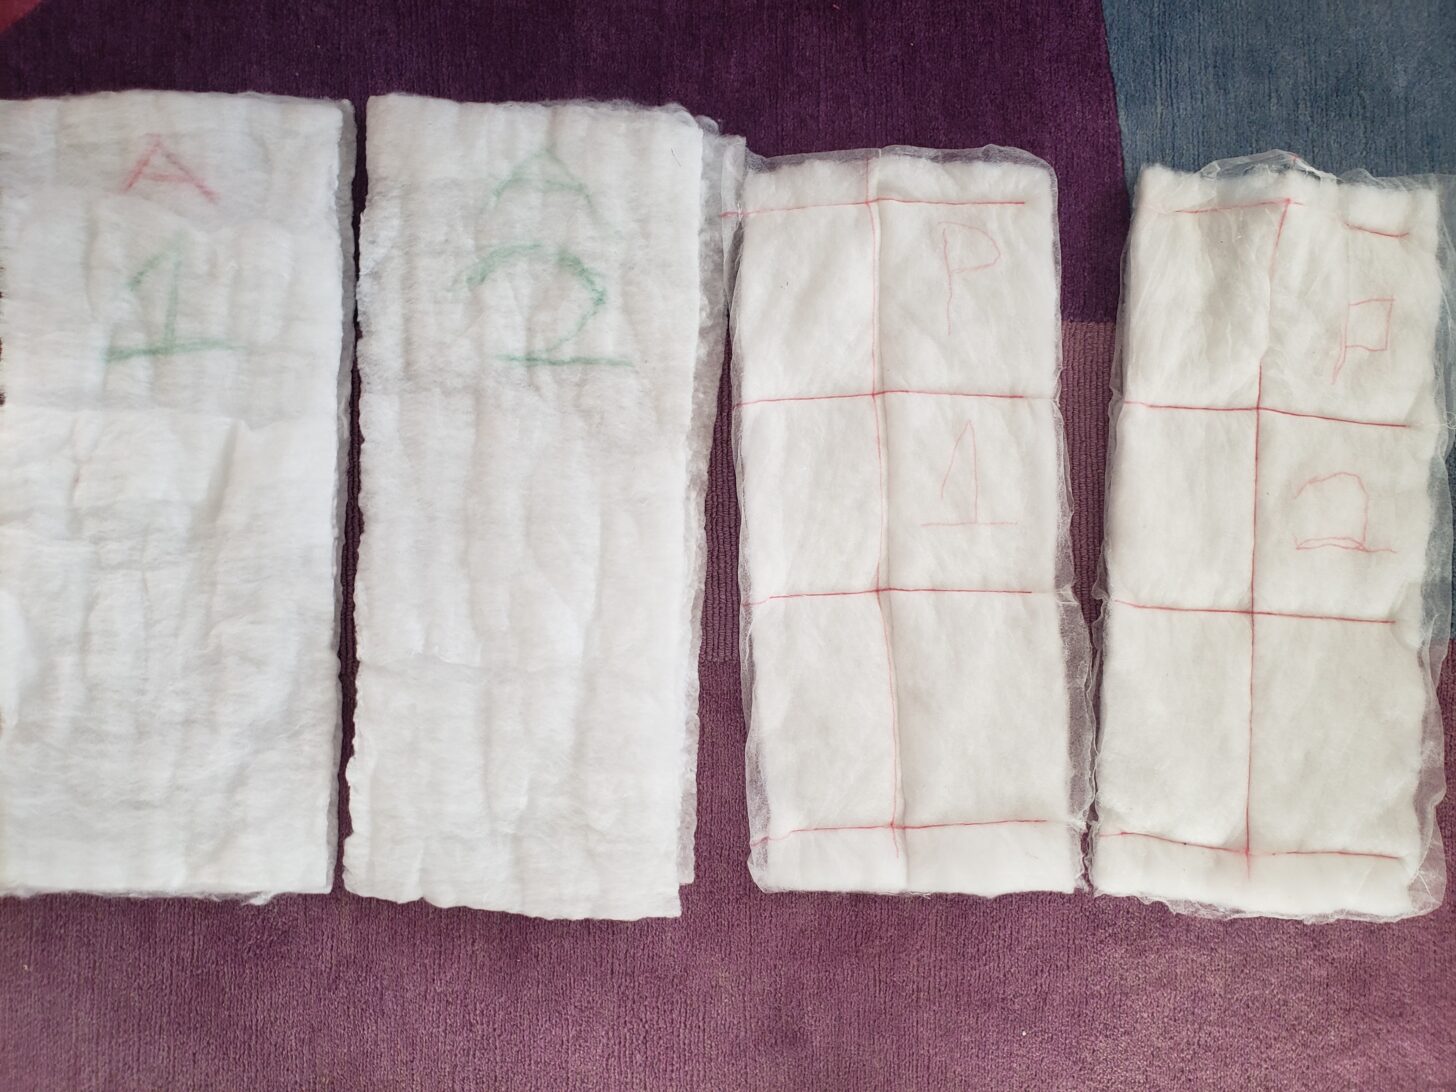 four samples of synthetic insulation side by side.